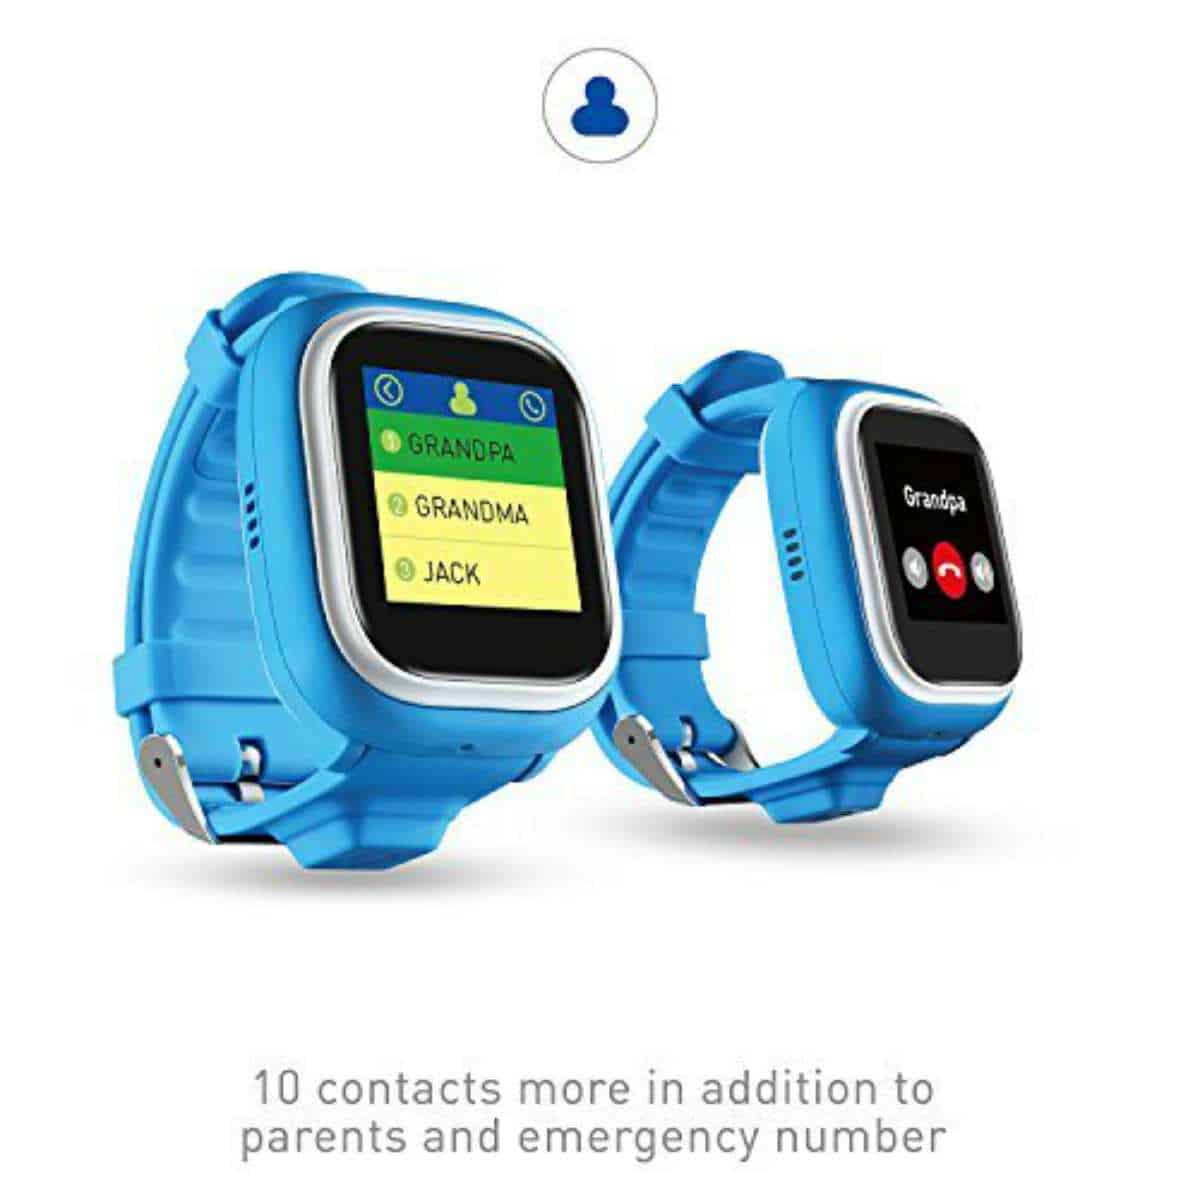 TickTalk 2.0 Kids' Smart Watch | Best GPS-Enabled Kids Watches | Child Safety For The Modern Family